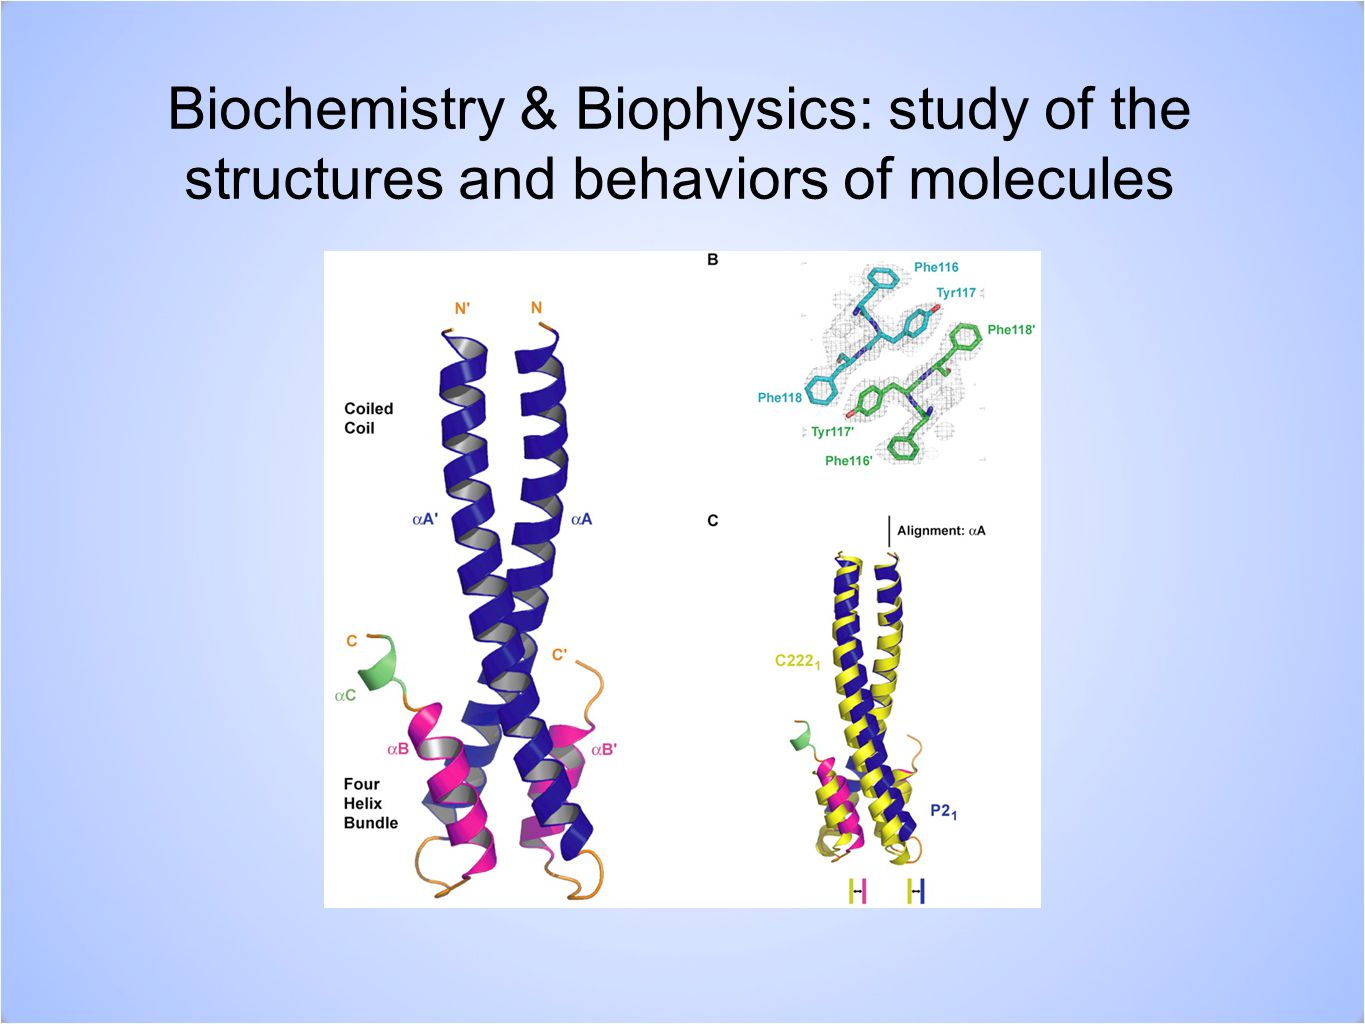 Biochemistry & Biophysics: study of the structures and behaviors of molecules